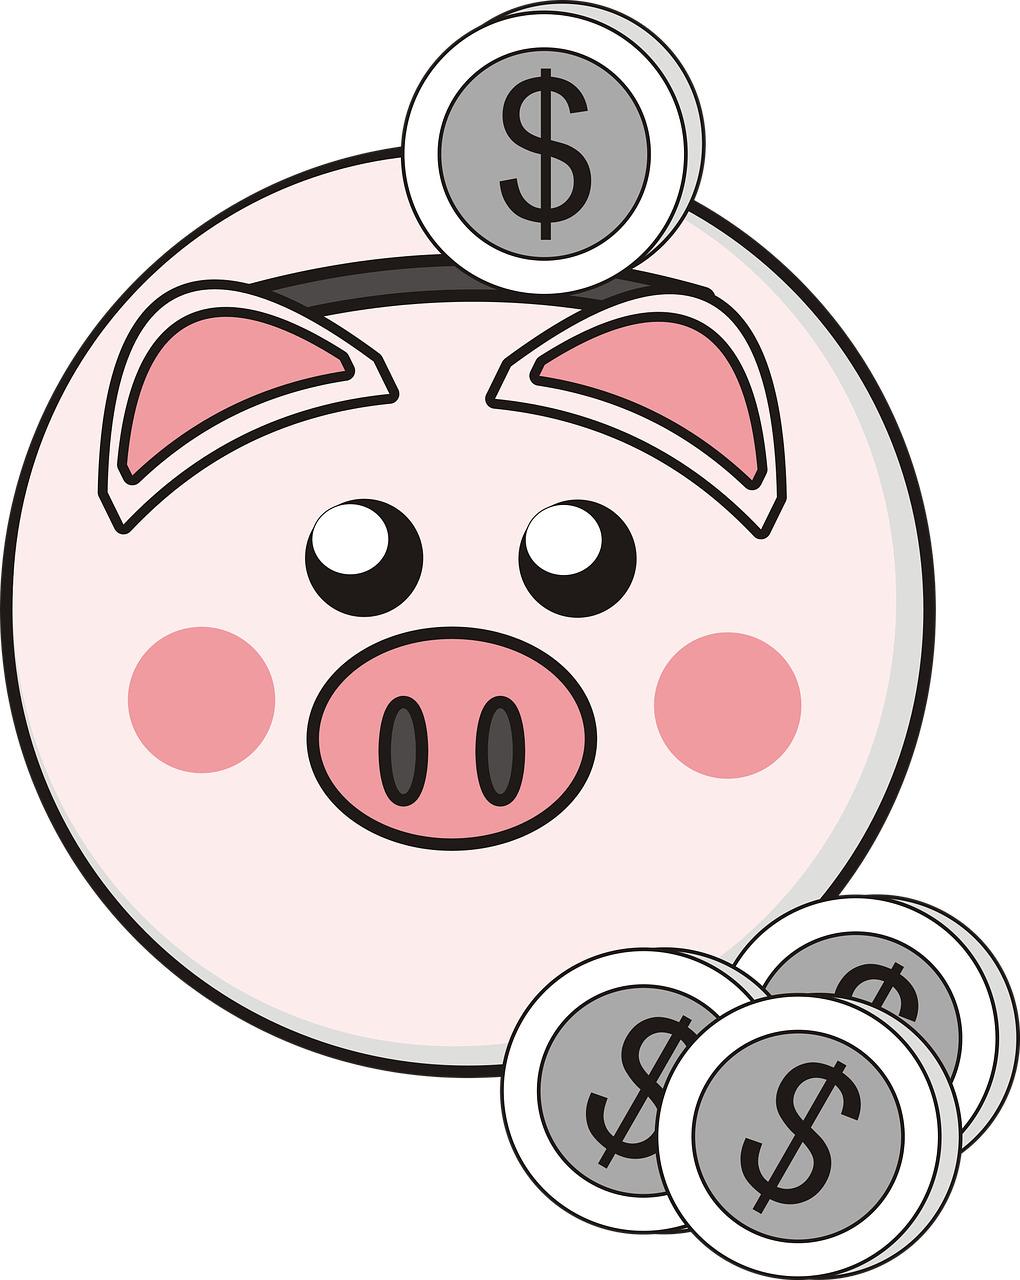 Piggy Bank With Dollar Coin Clipart png transparent